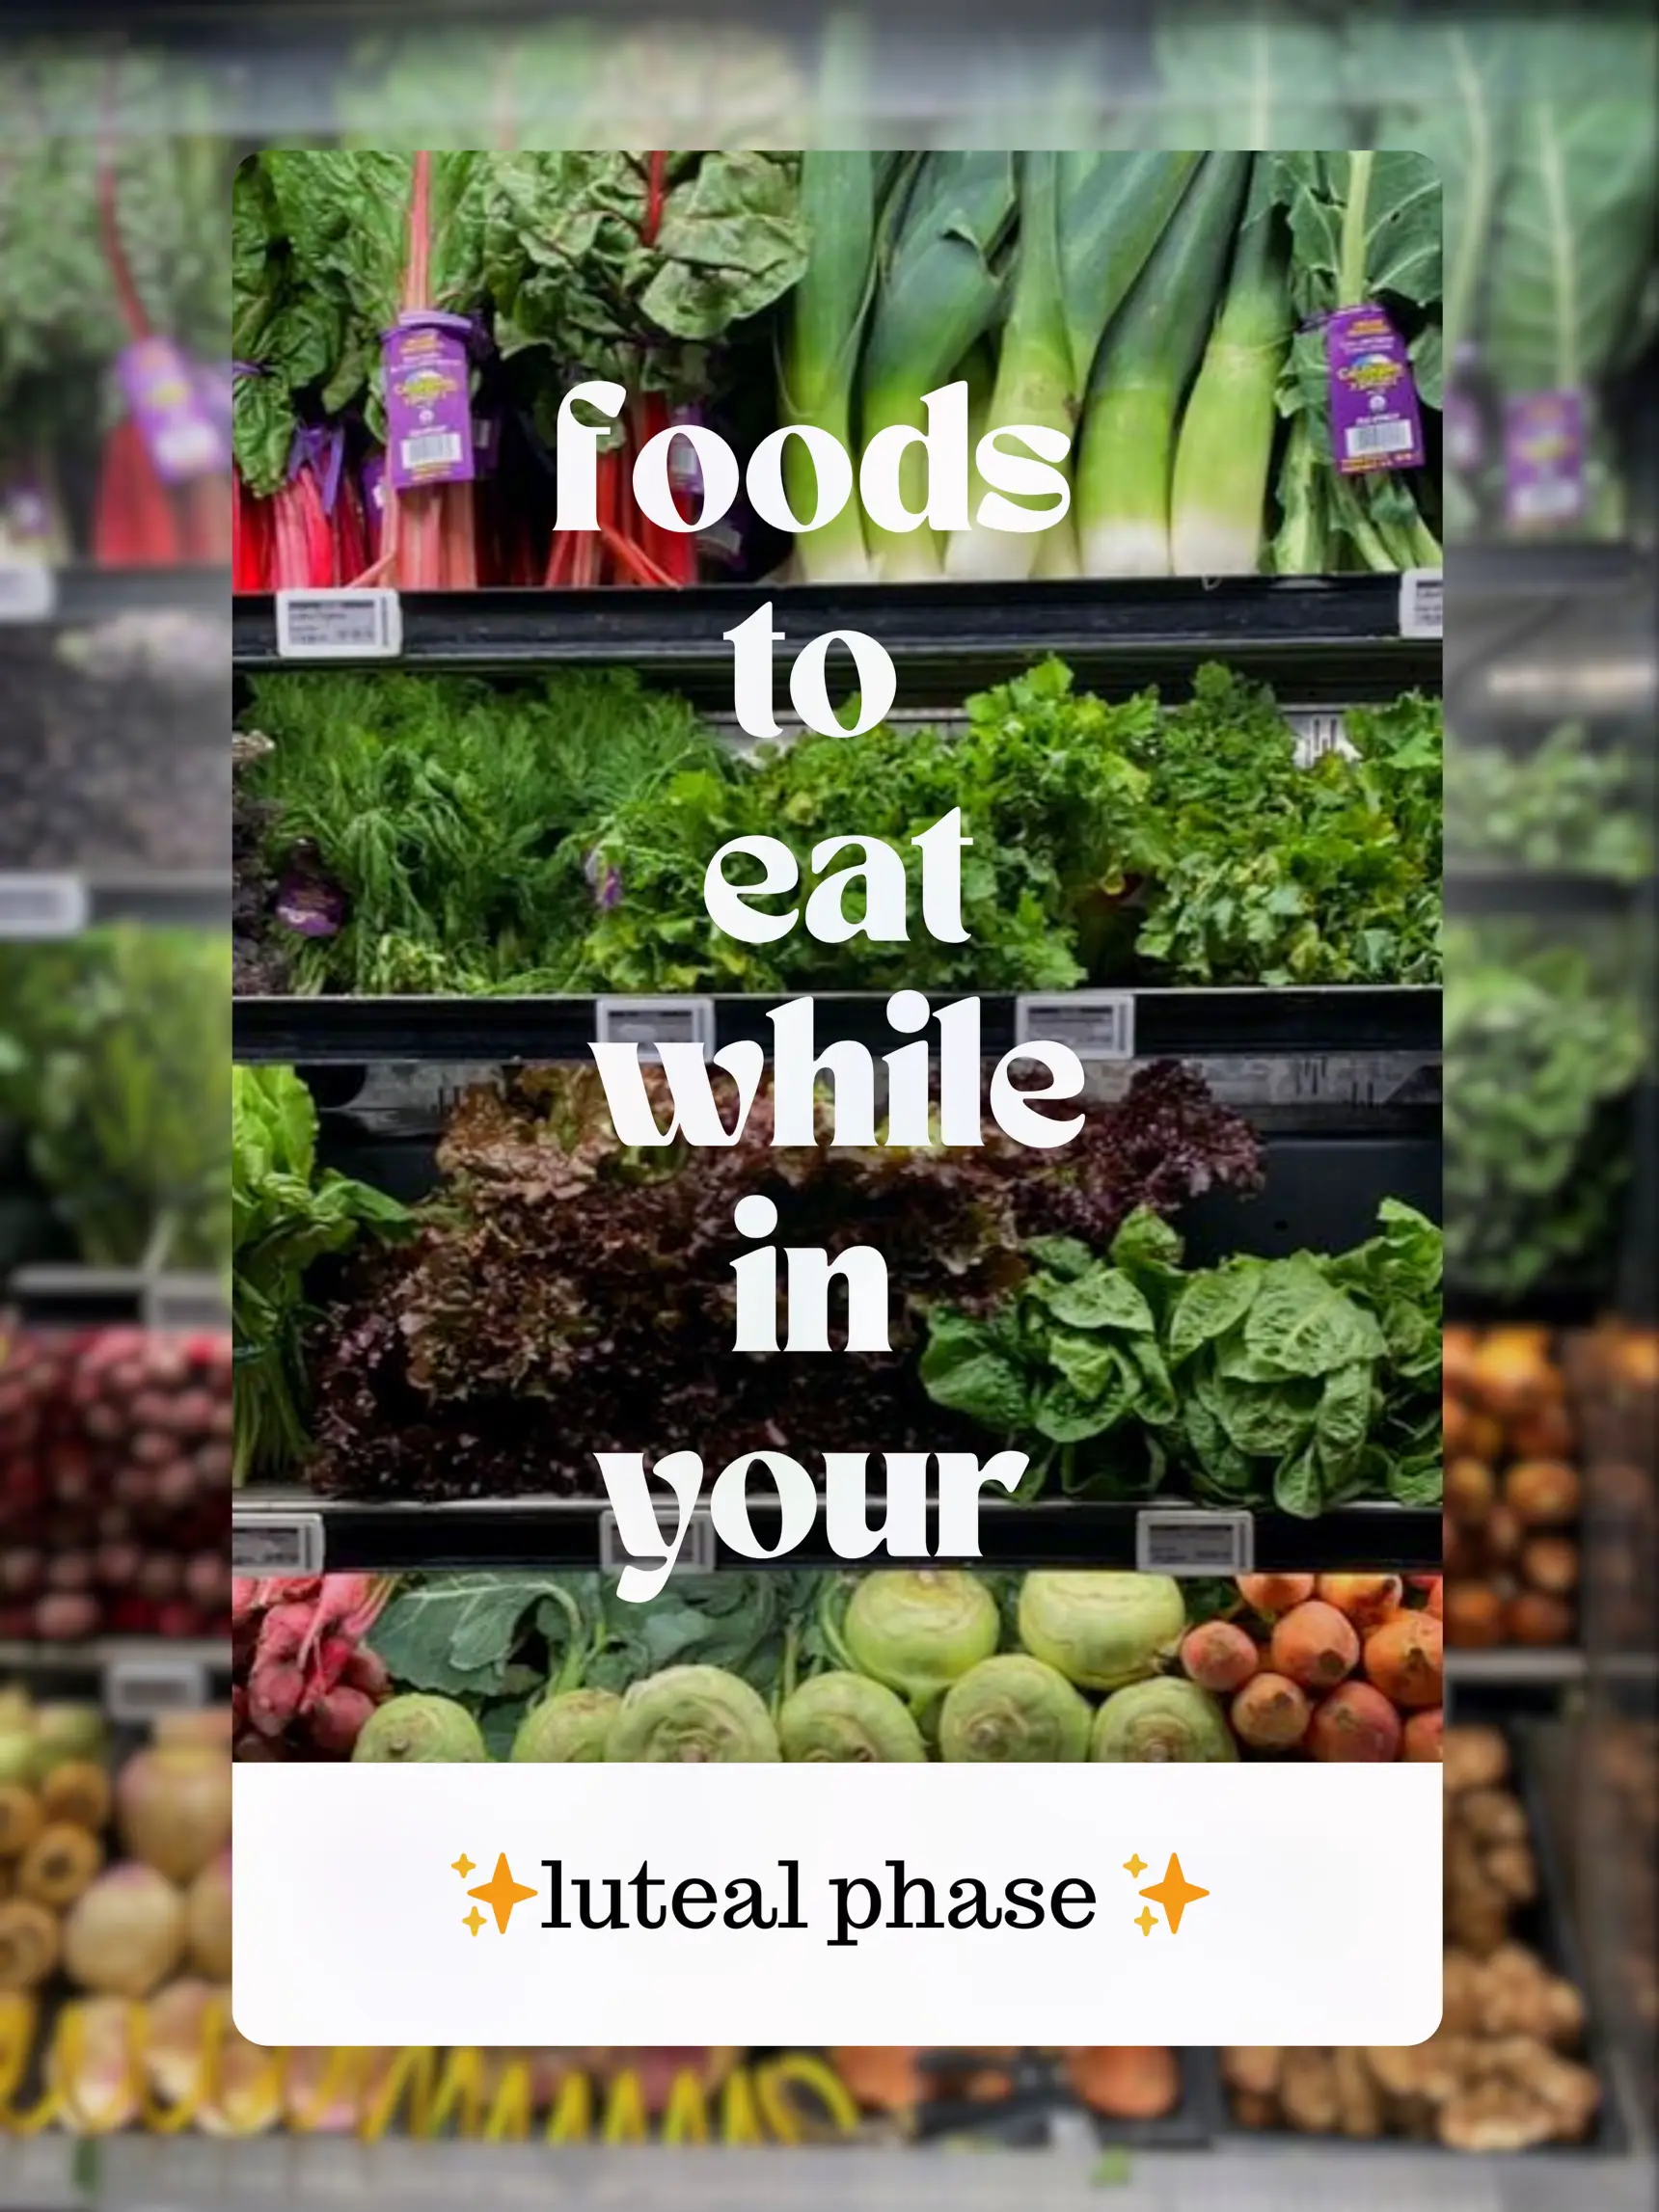 luteal phase foods, Gallery posted by janae 🧚‍♀️